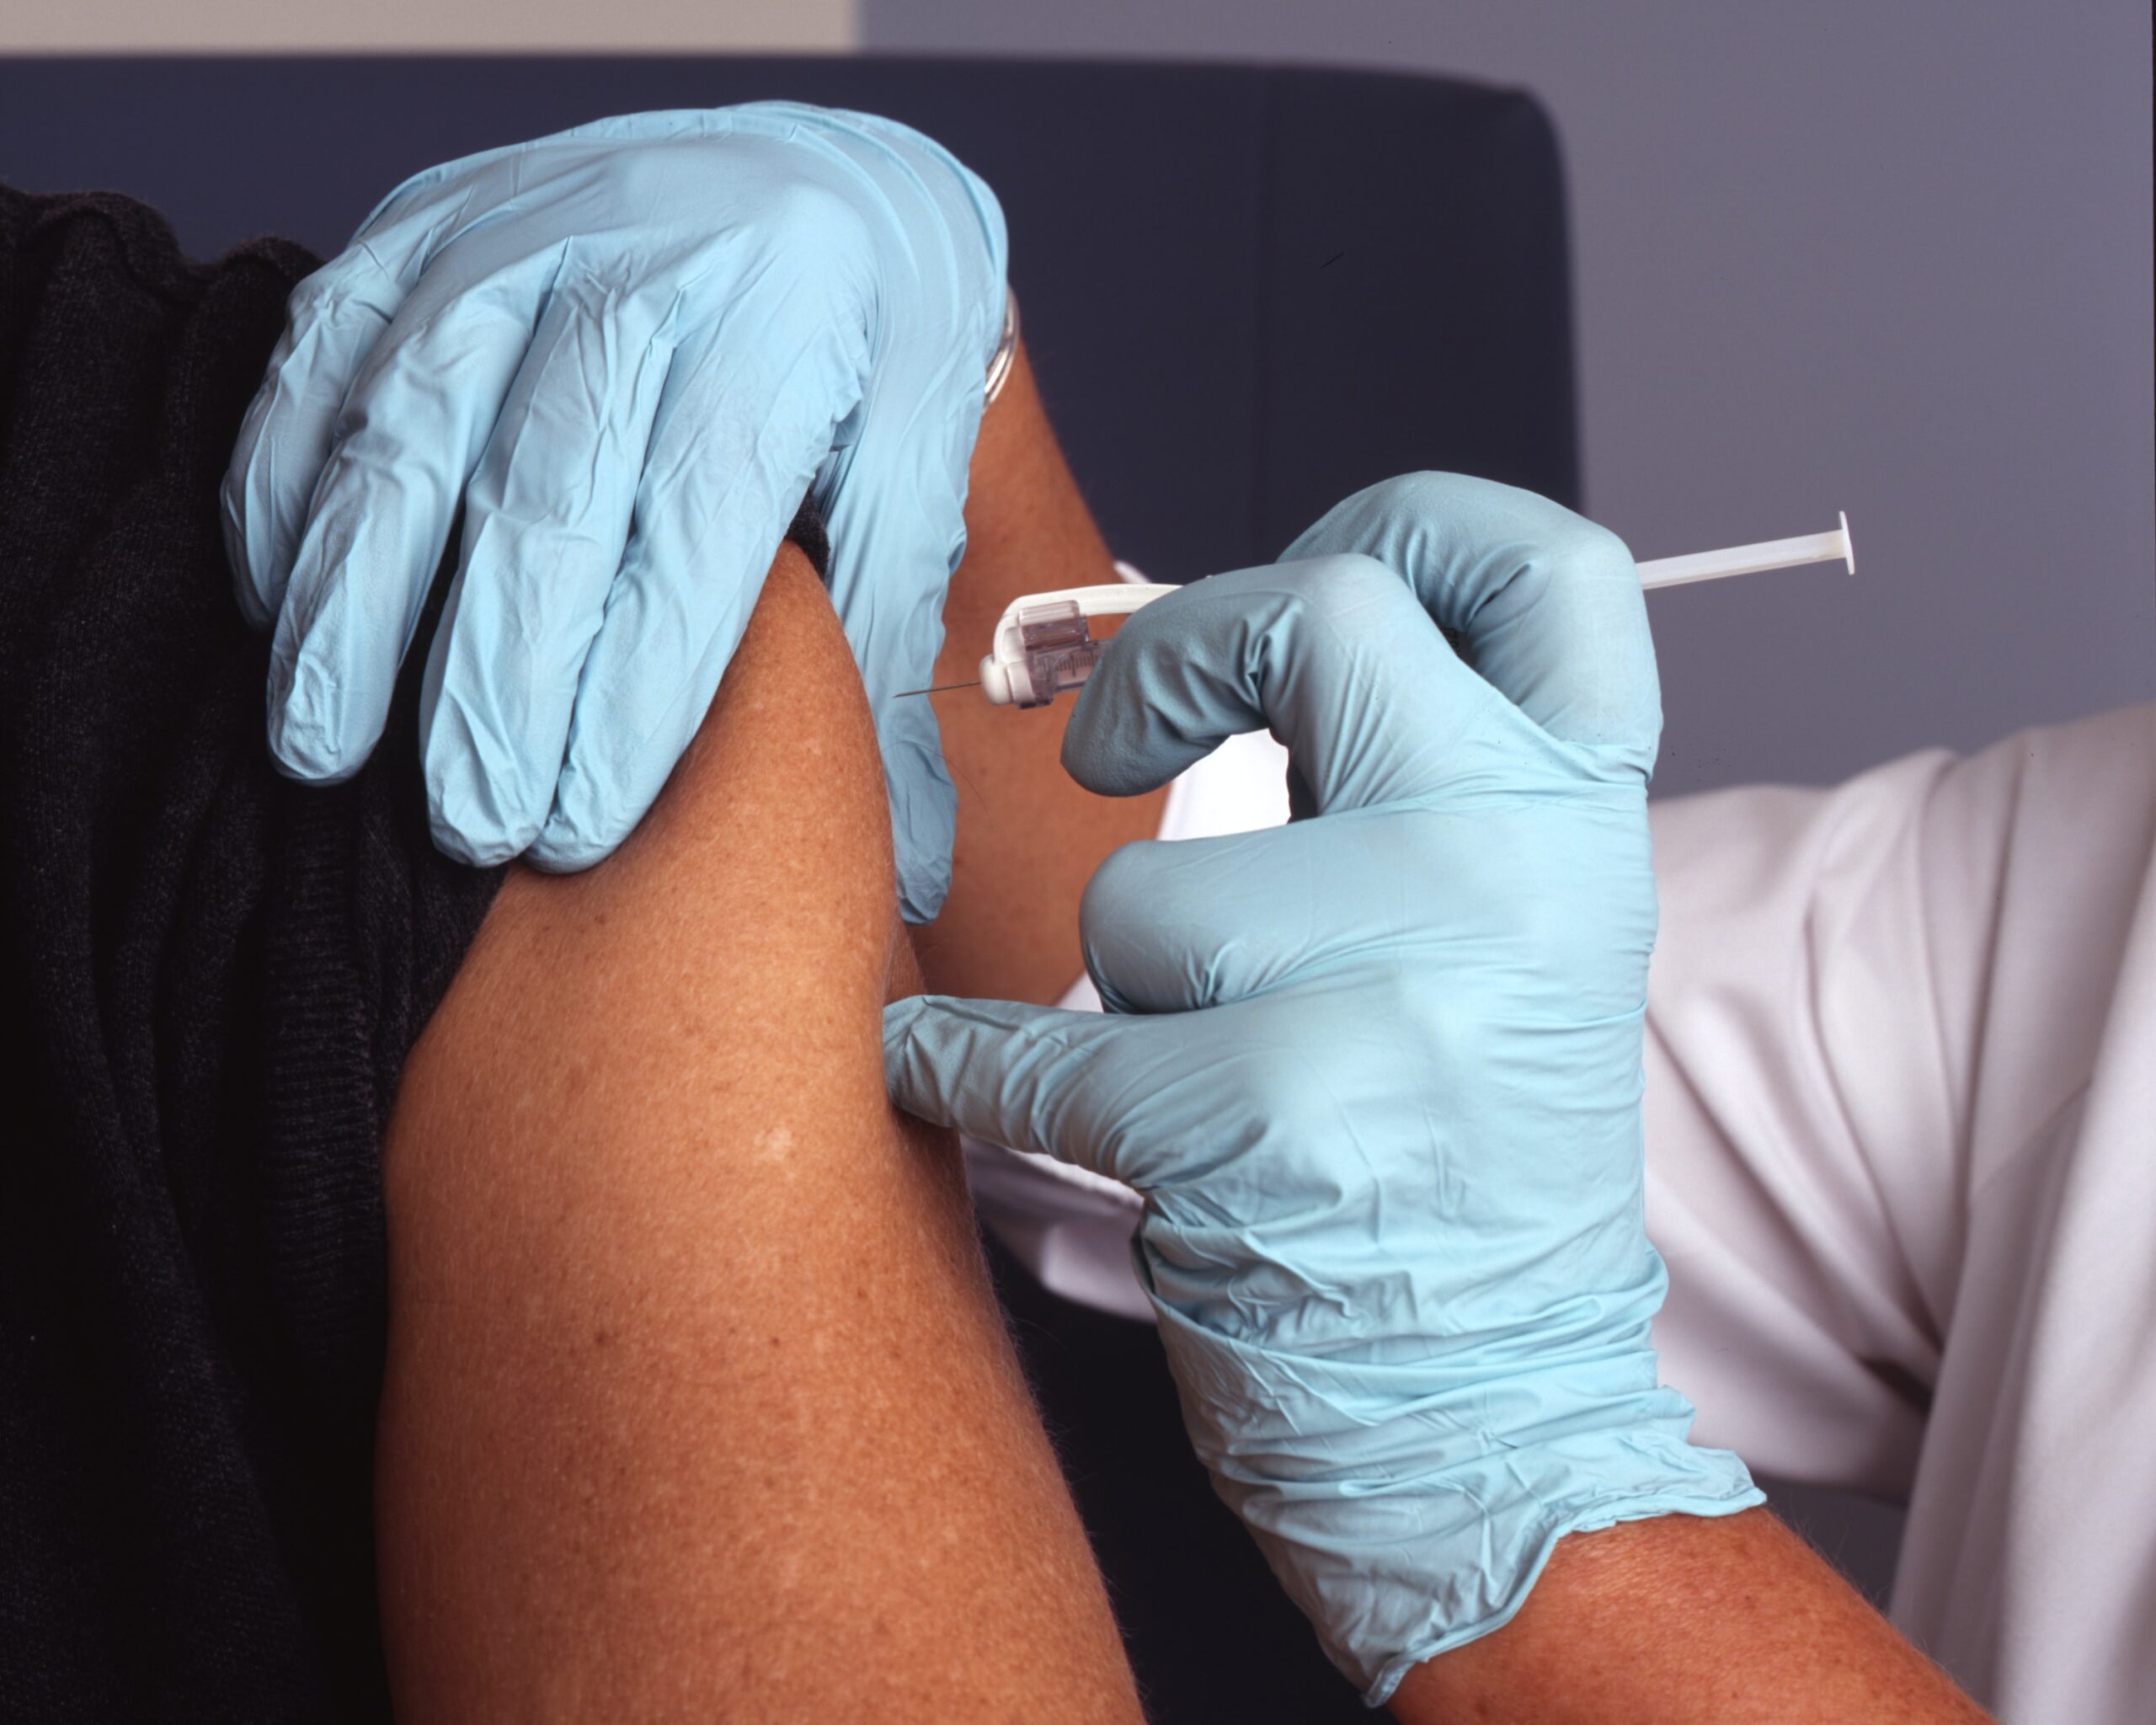 Flu vaccine image for article about three reasons to get your flu shot